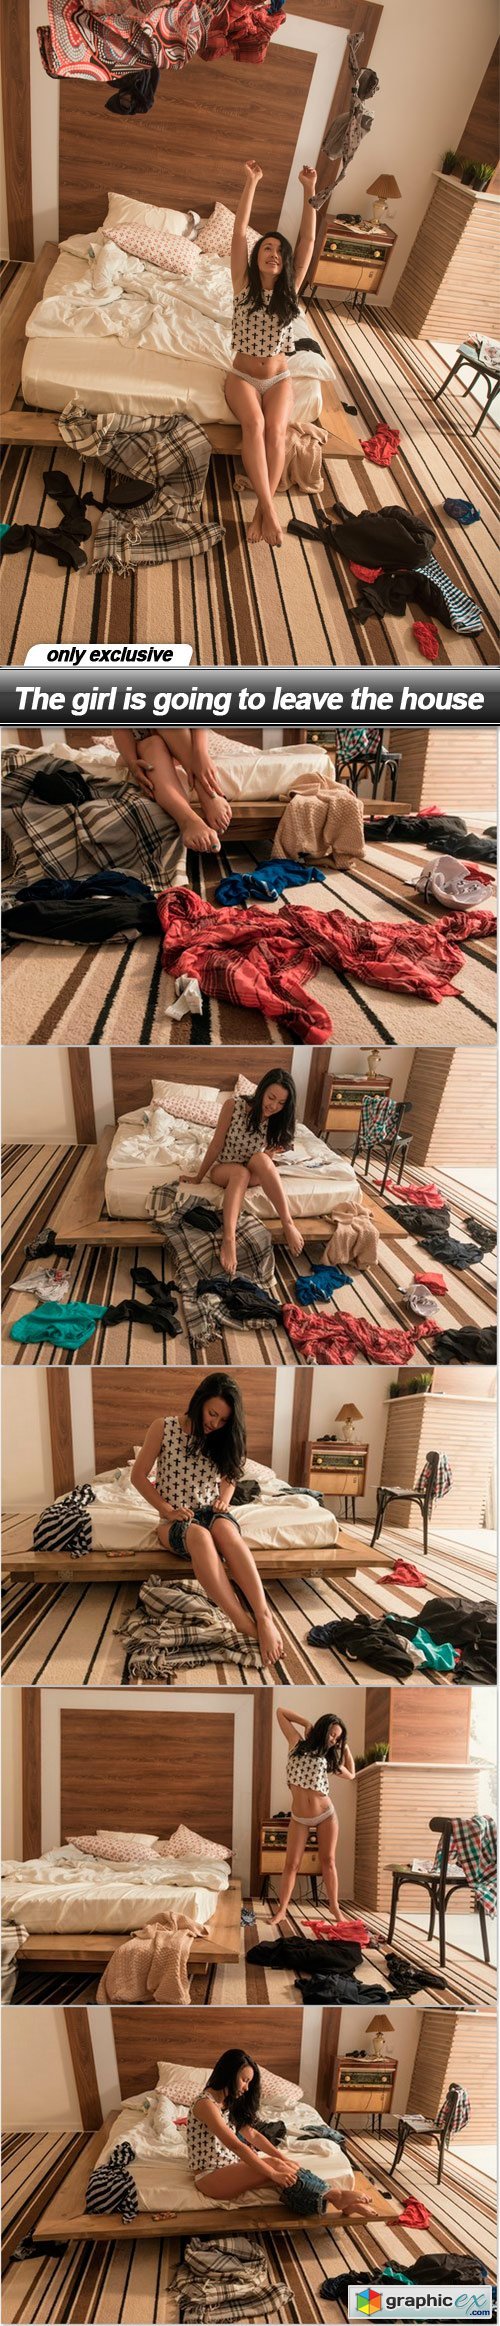 The girl is going to leave the house - 6 UHQ JPEG